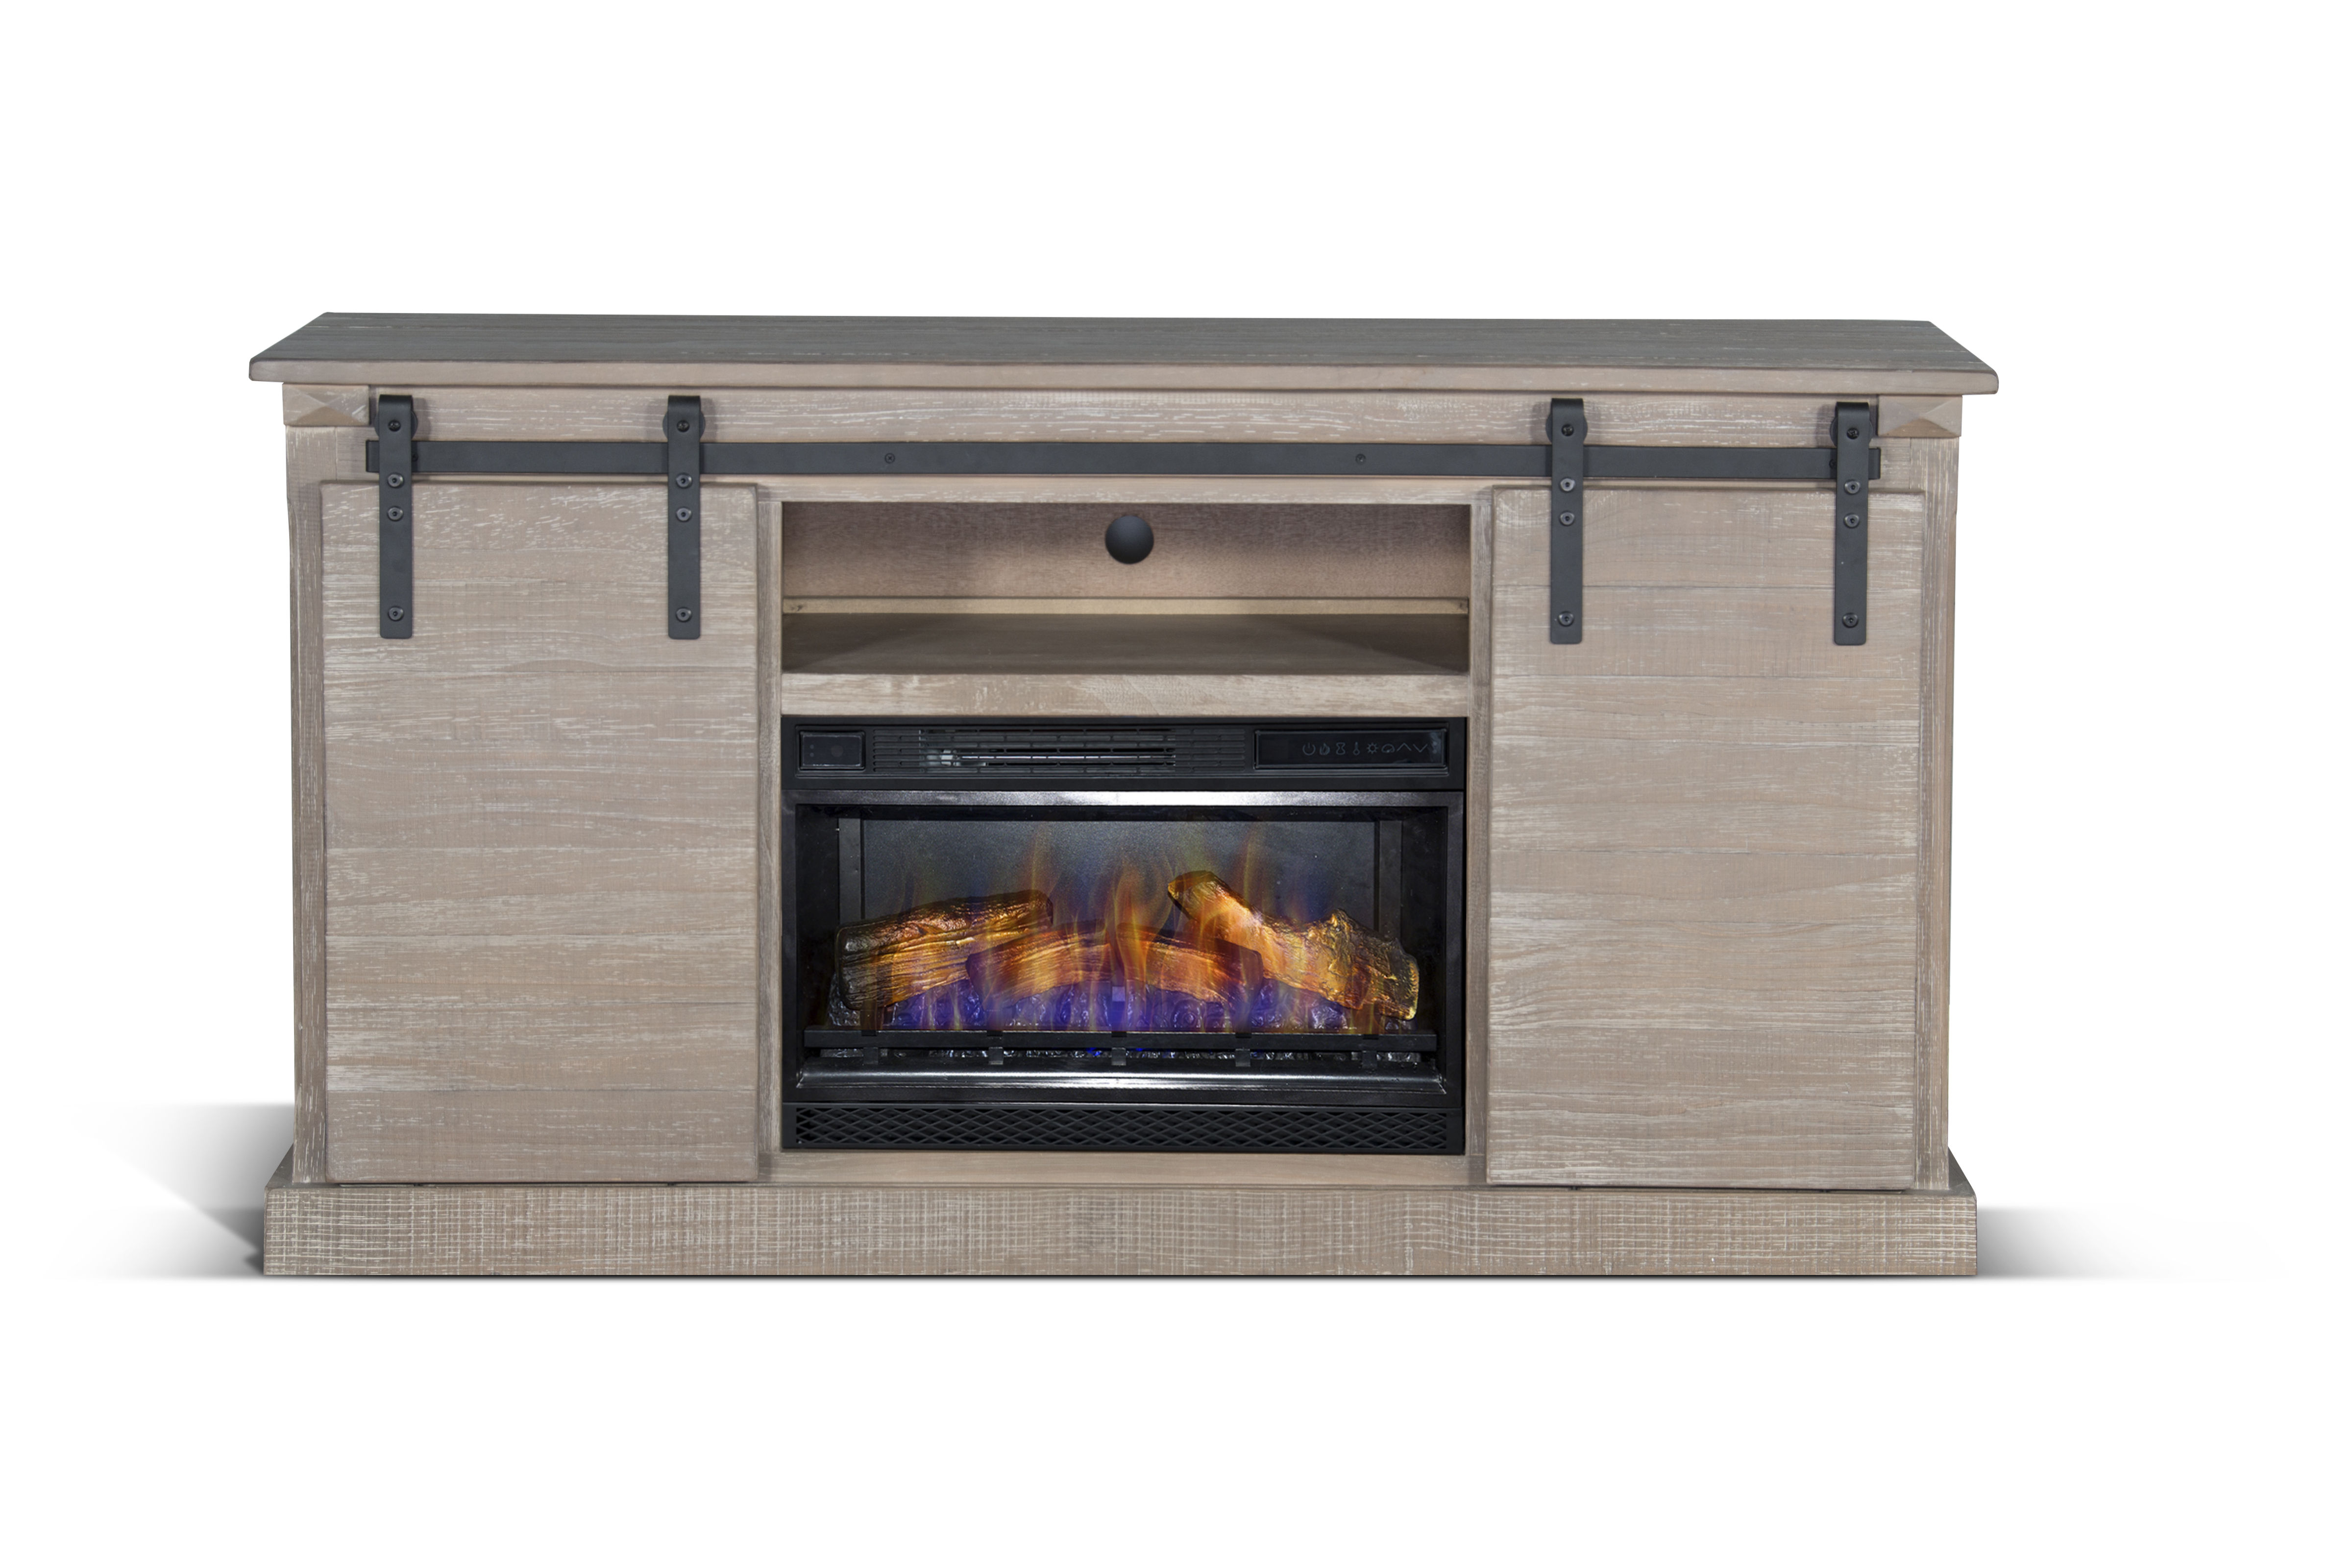 Fireplace Tv Stand Barn Door Awesome Sunny Designs Taupe Mountain Smoke Barn Door Tv Console